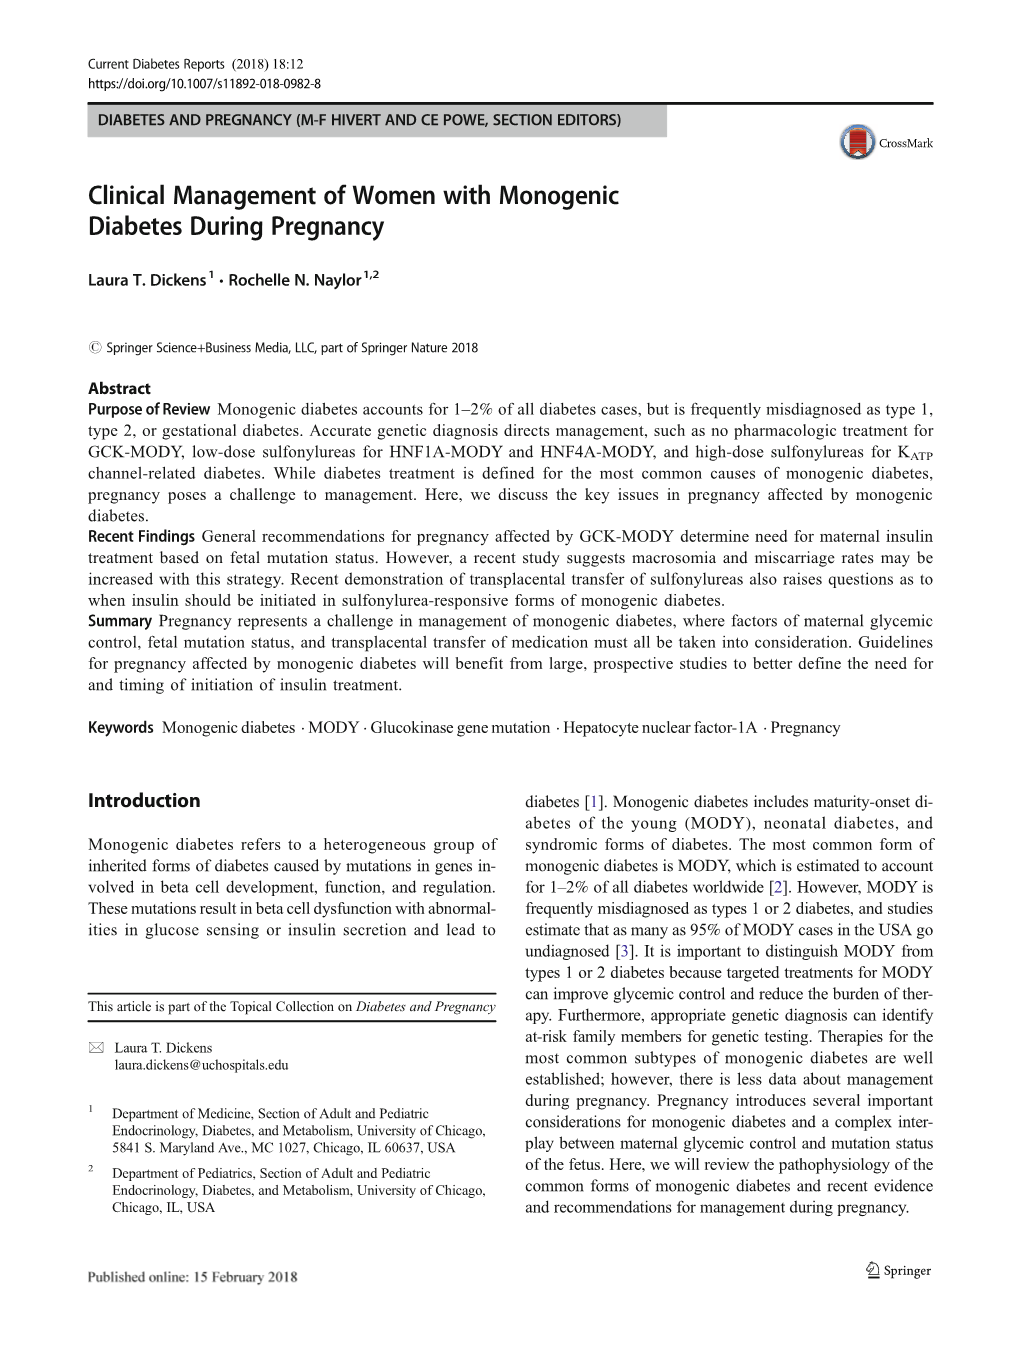 Clinical Management of Women with Monogenic Diabetes During Pregnancy